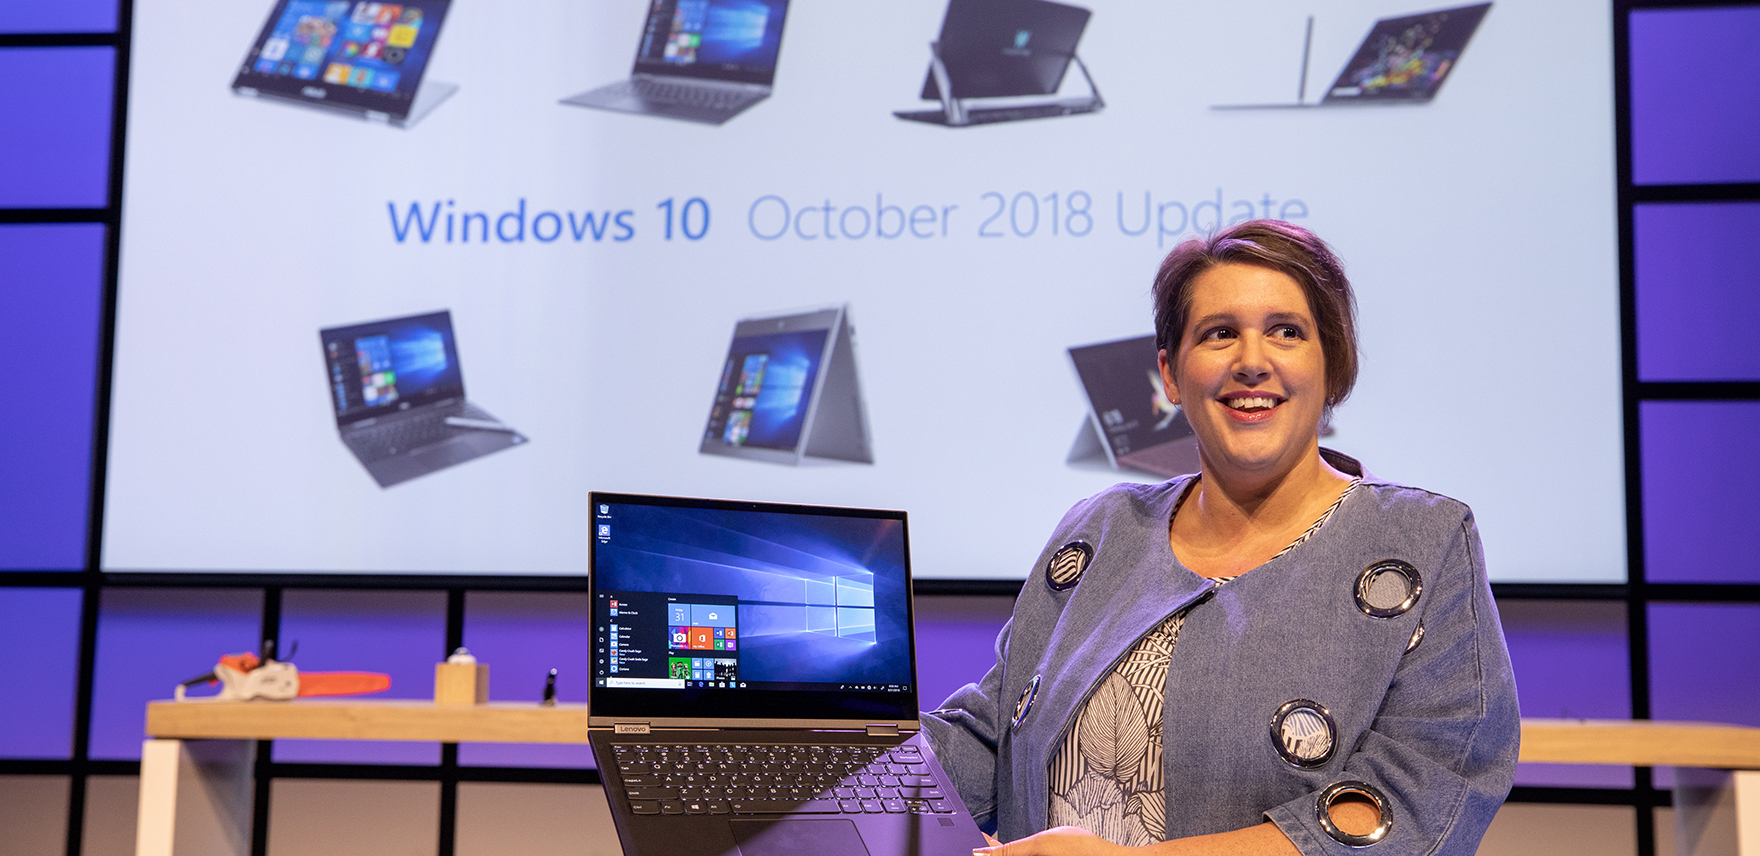 Erin Chapple, corporate vice president, Microsoft, speaking at the IFA 2018 keynote in Berlin, with displays of laptops and other devices behind her on the stage